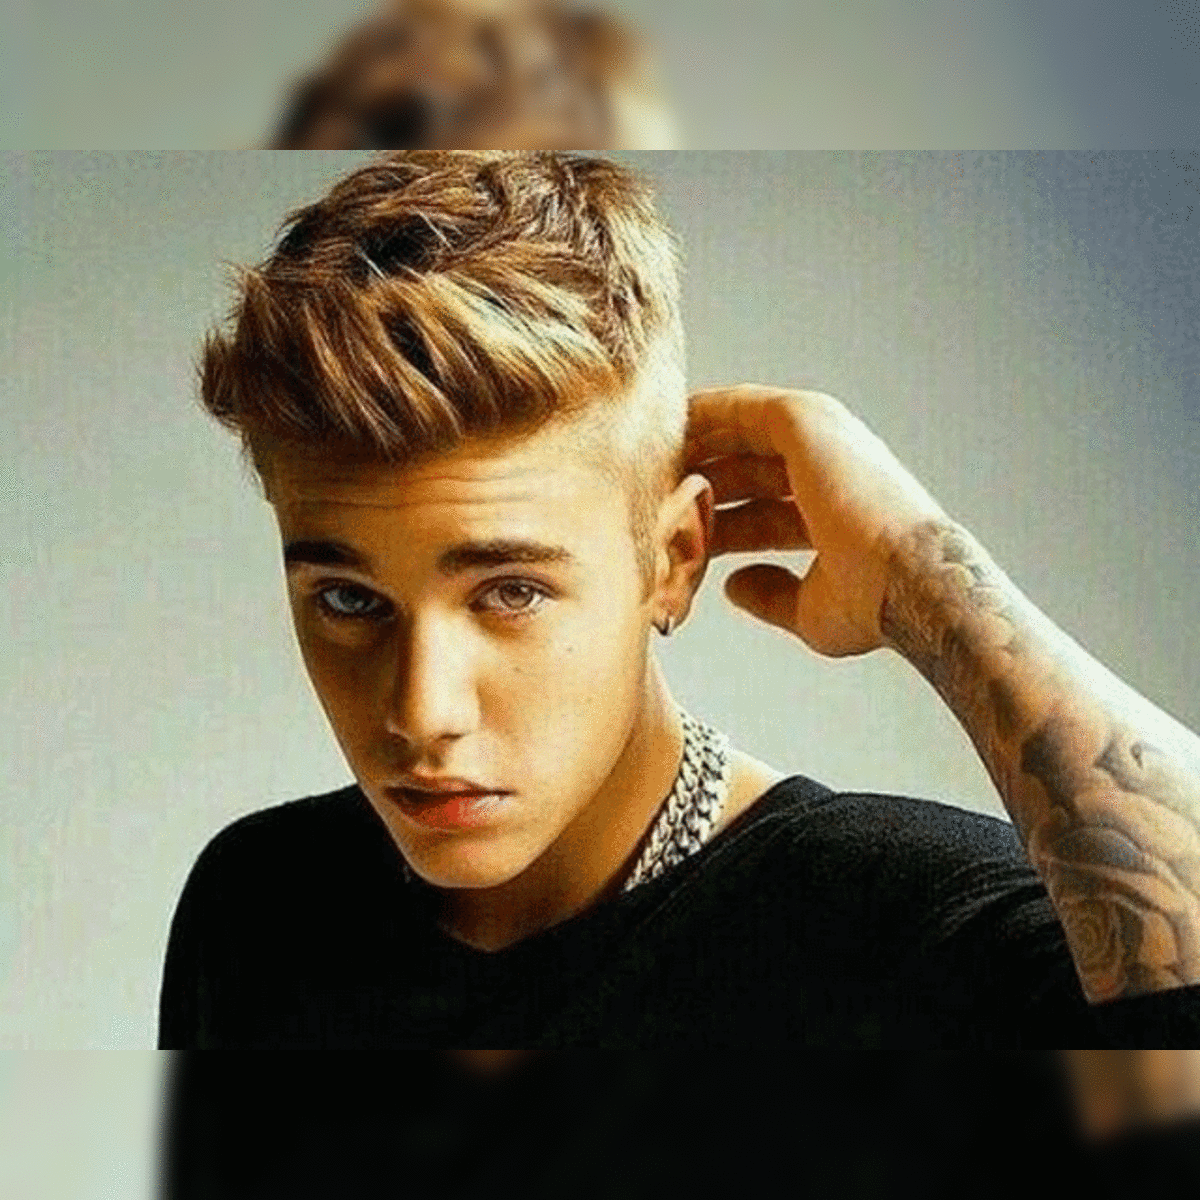 at 4mn justin biebers mumbai concert will be the most expensive gig in india ever